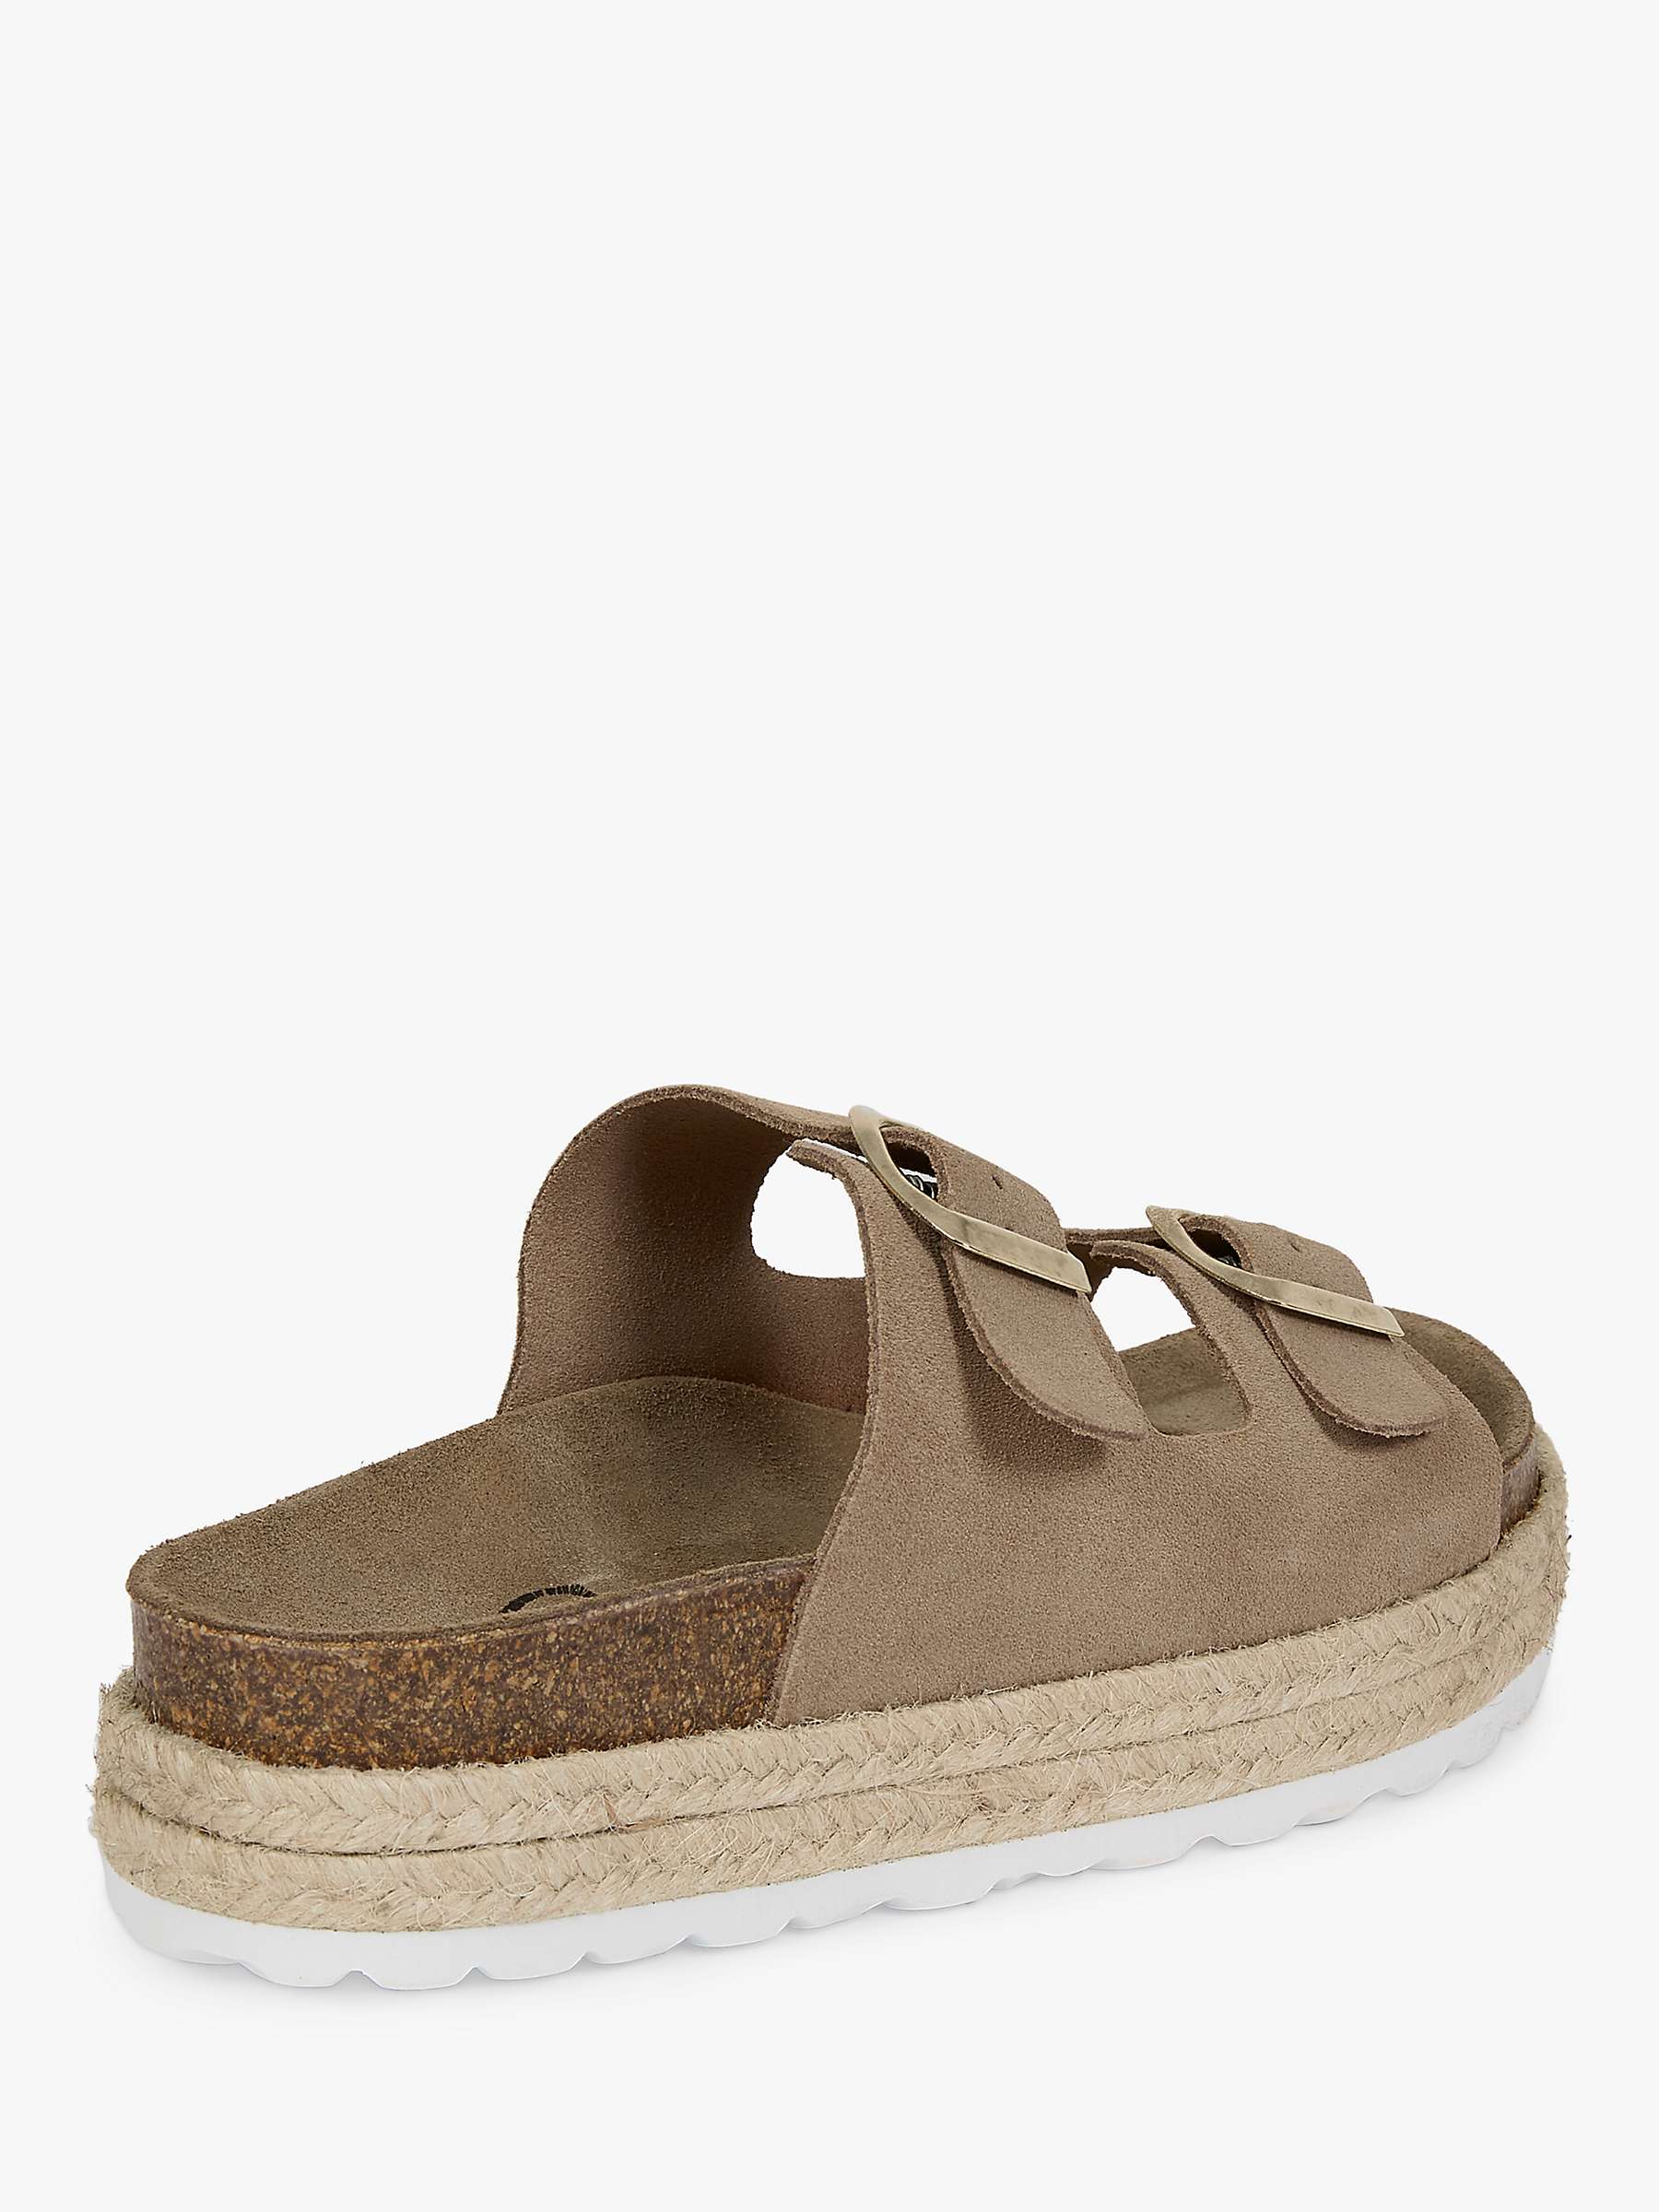 Buy Celtic & Co. Suede Double Buckle Footbed Sandals Online at johnlewis.com